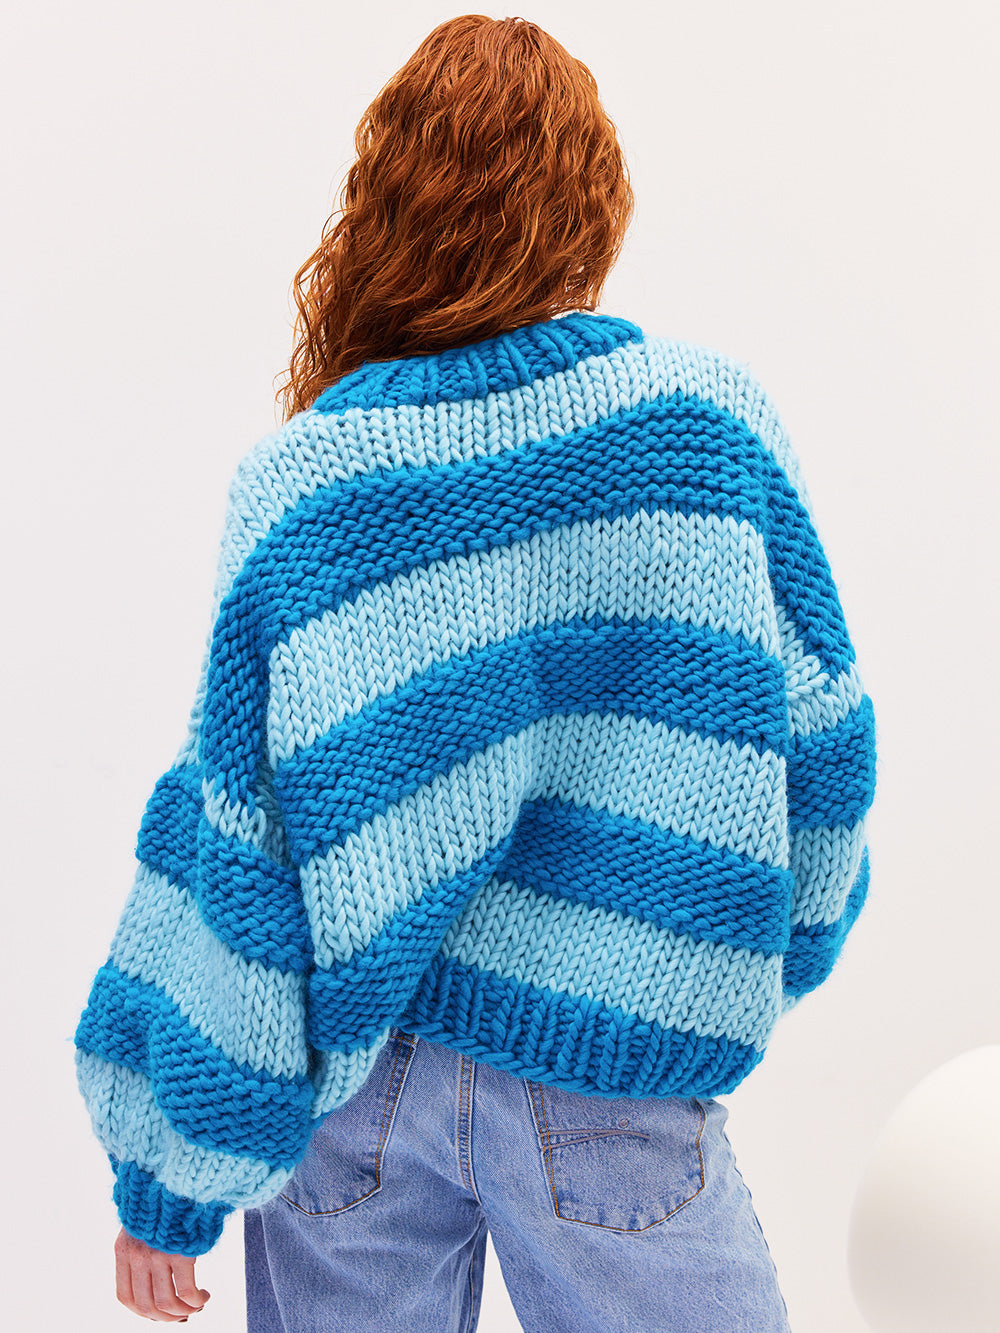 Knit the Head-Turning Suzie Jumper with Cardigang